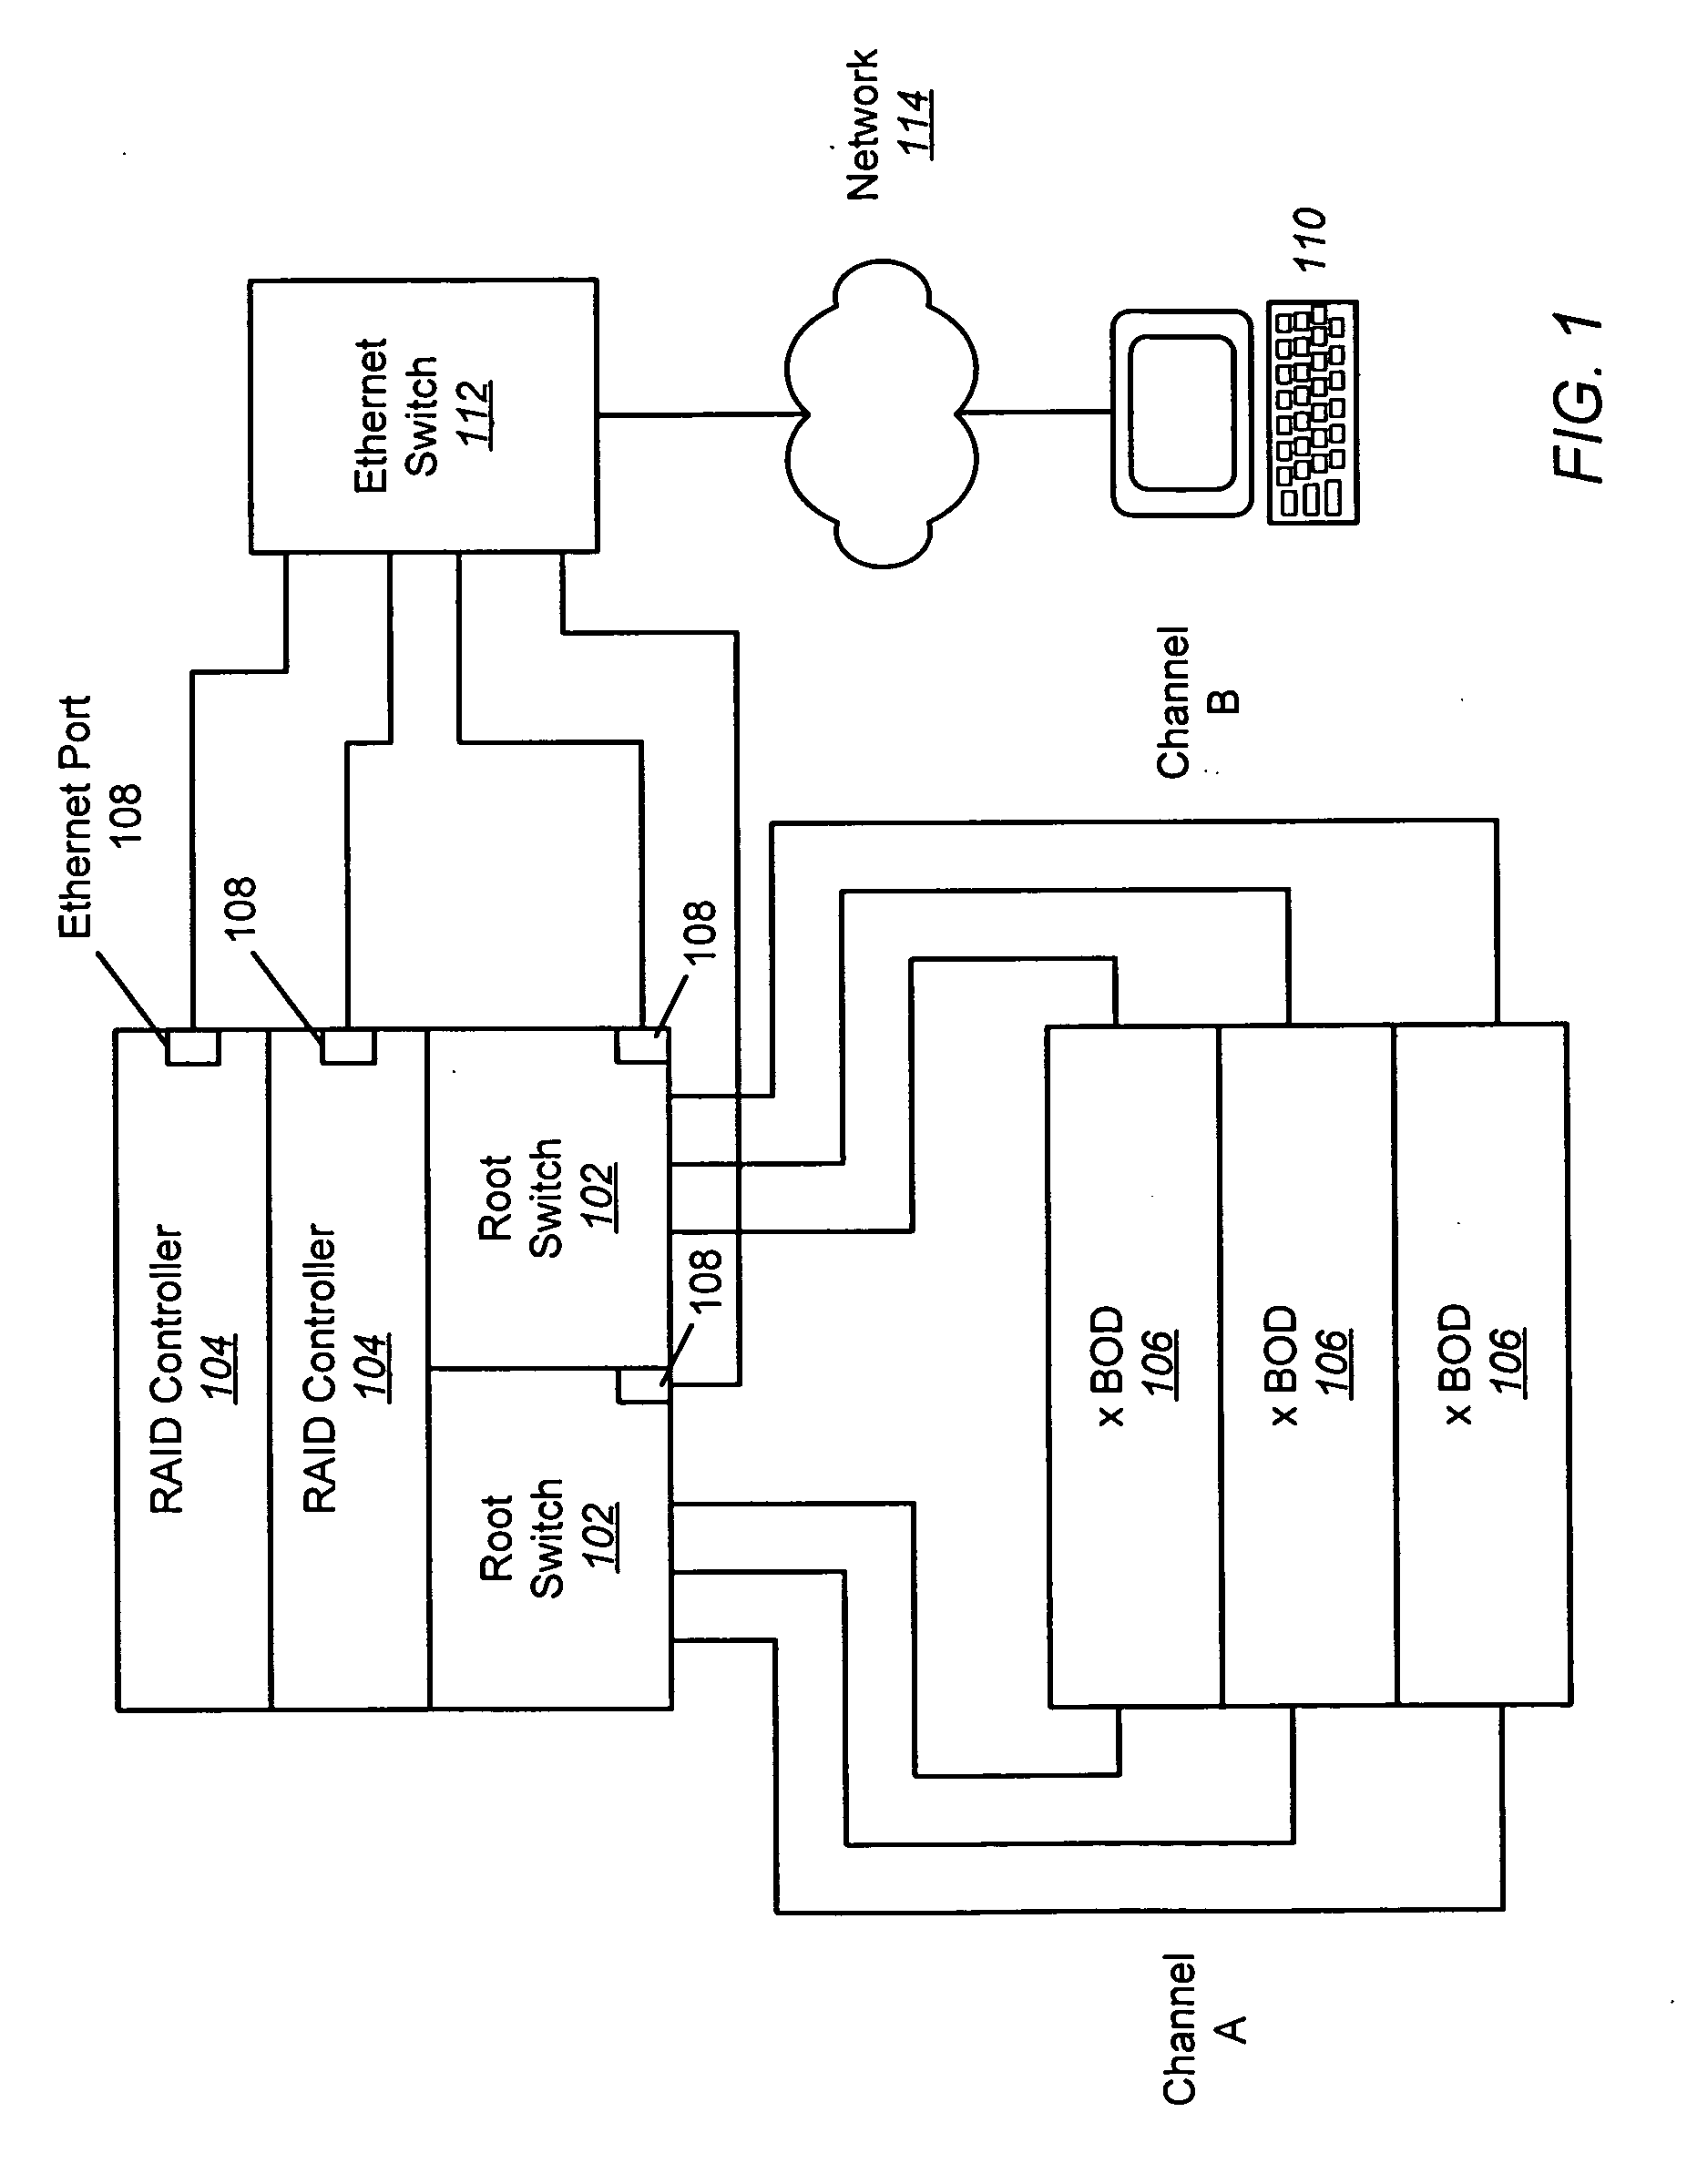 Discovery and configuration of devices across an ethernet interface